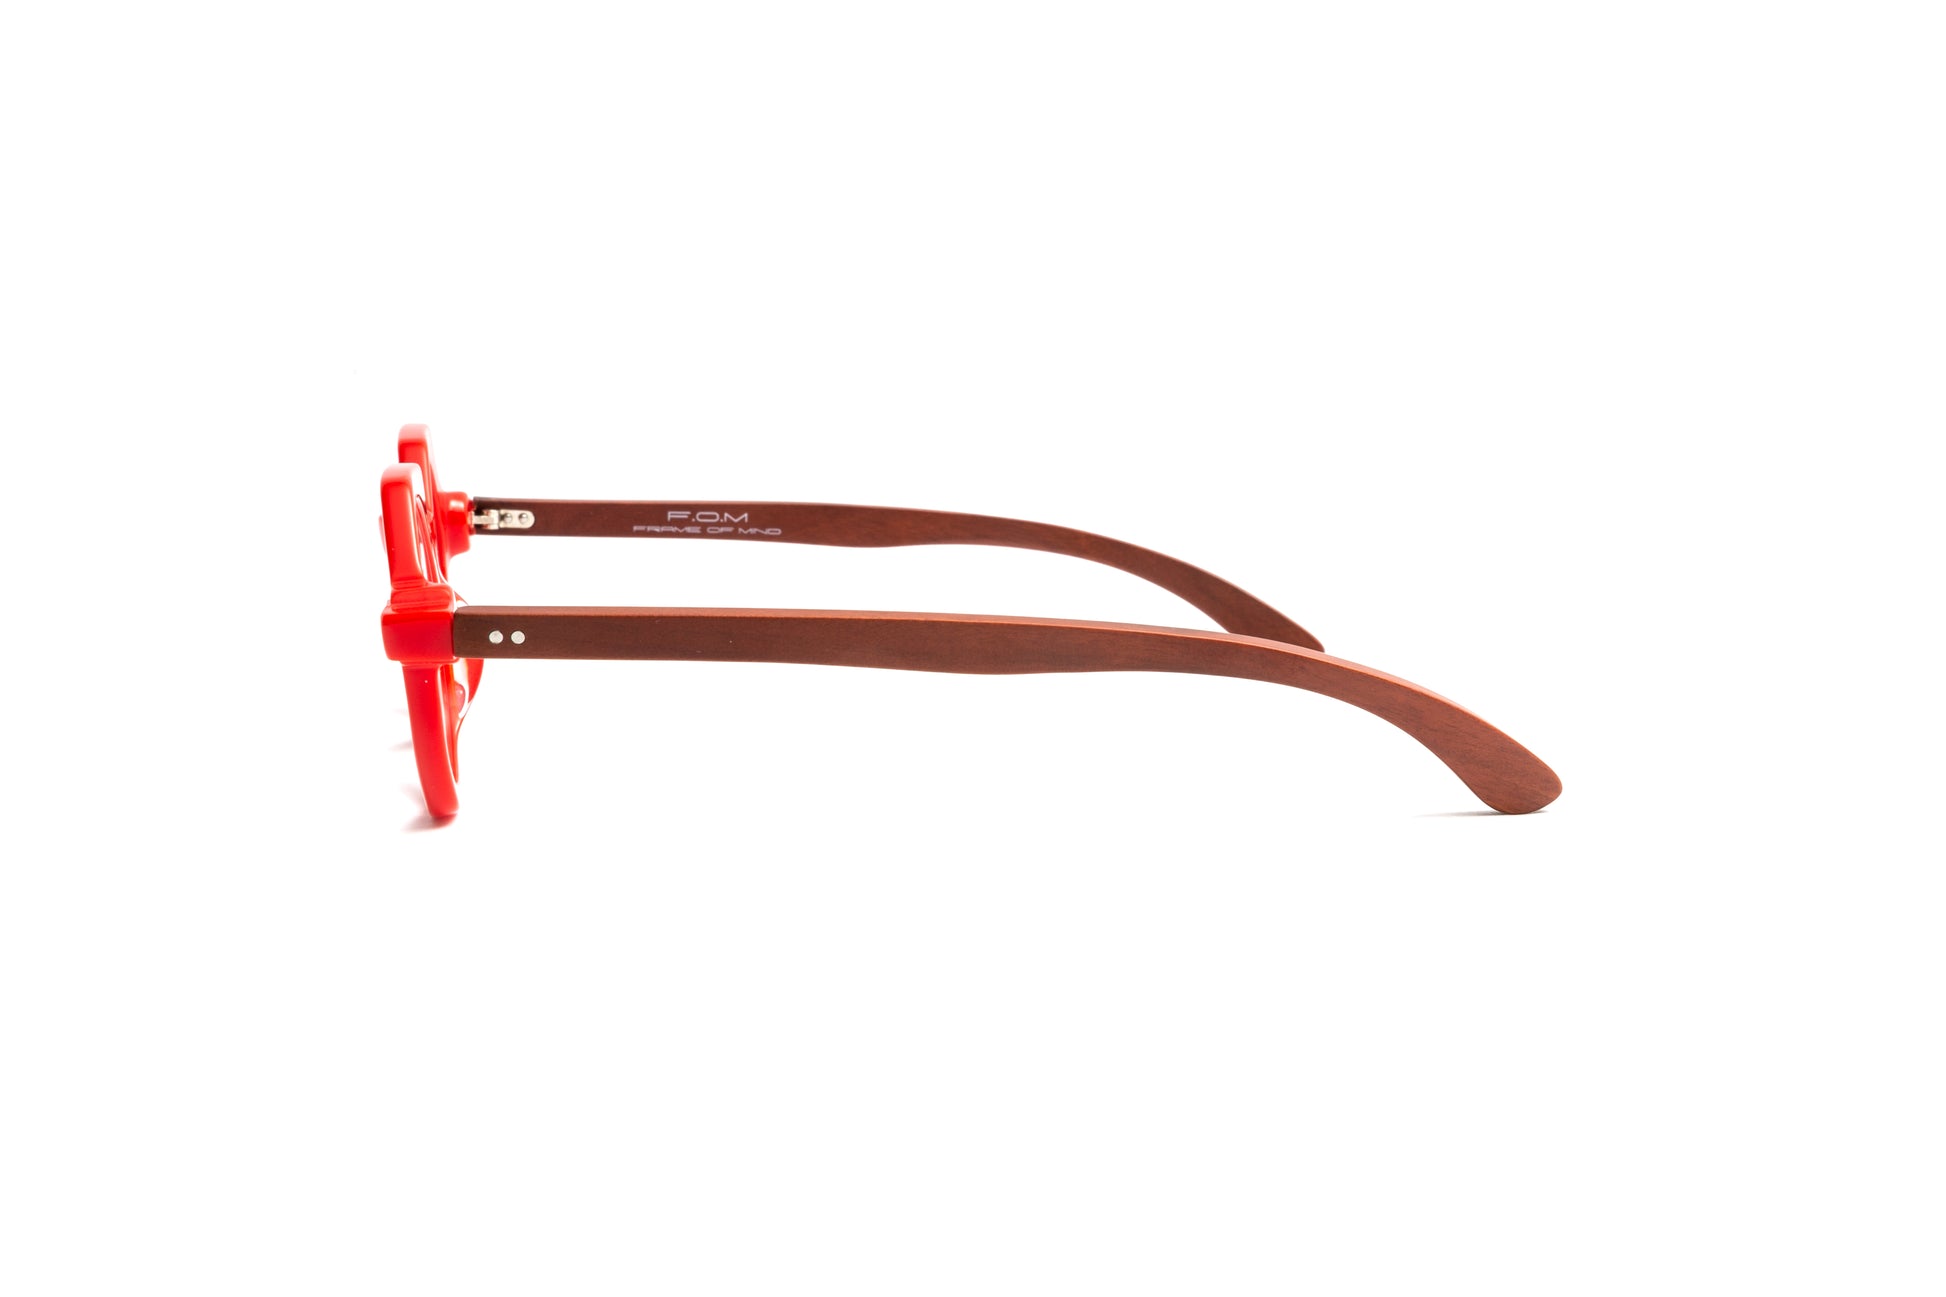 St. Moritz round pantos red acetate reading glasses with cherry wood temples by Eyejets, unisex designer reading glasses